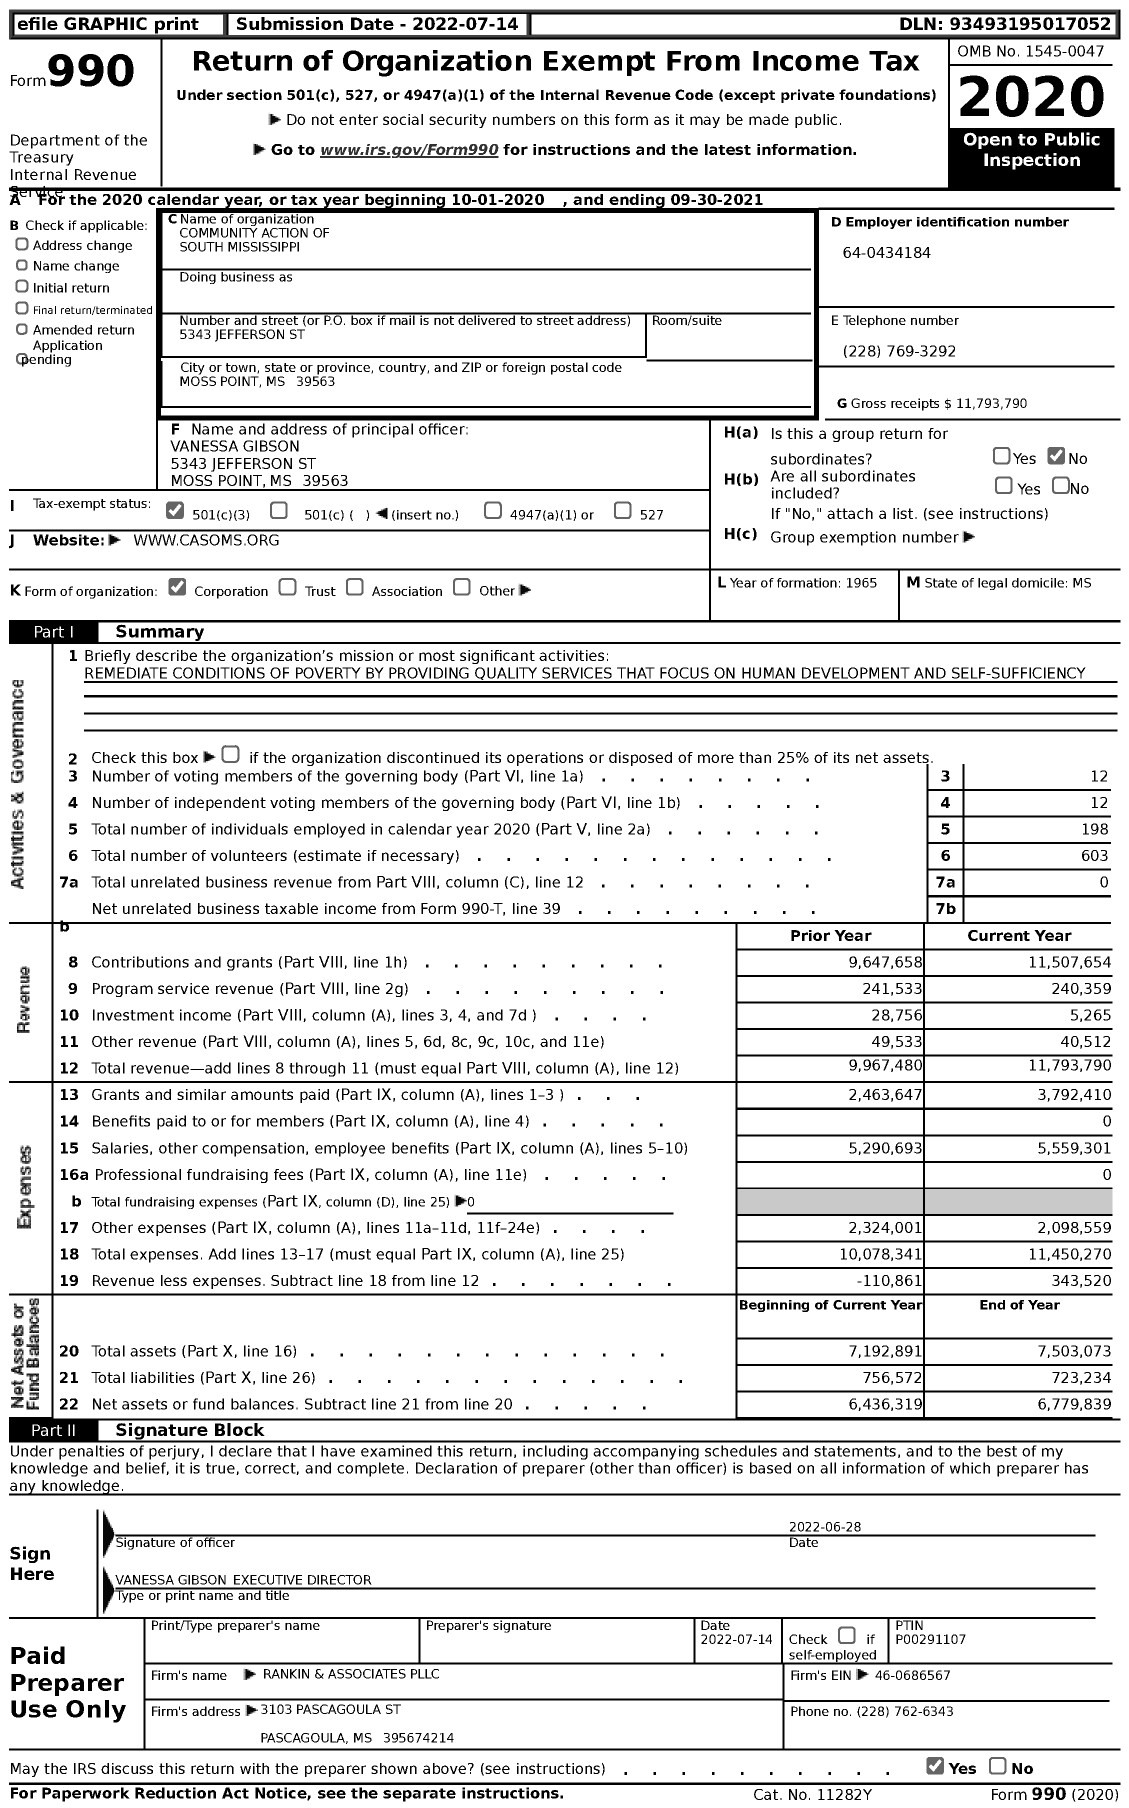 Image of first page of 2020 Form 990 for Community Action of South Mississippi (JCCAC)